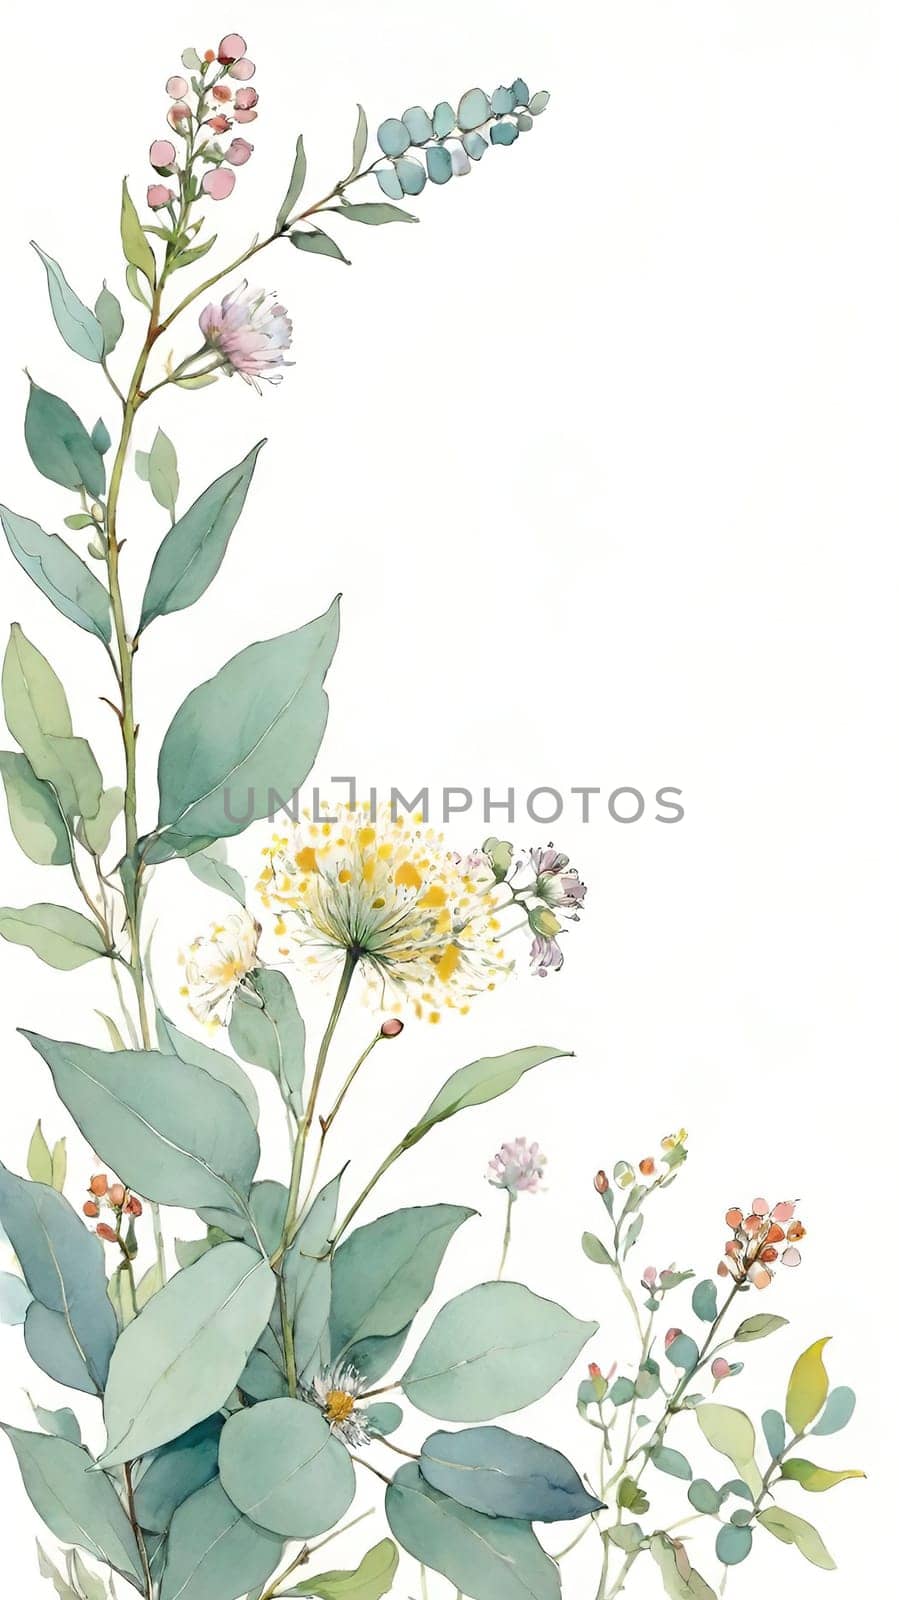 Watercolor illustration of wildflowers and eucalyptus branches. by yilmazsavaskandag